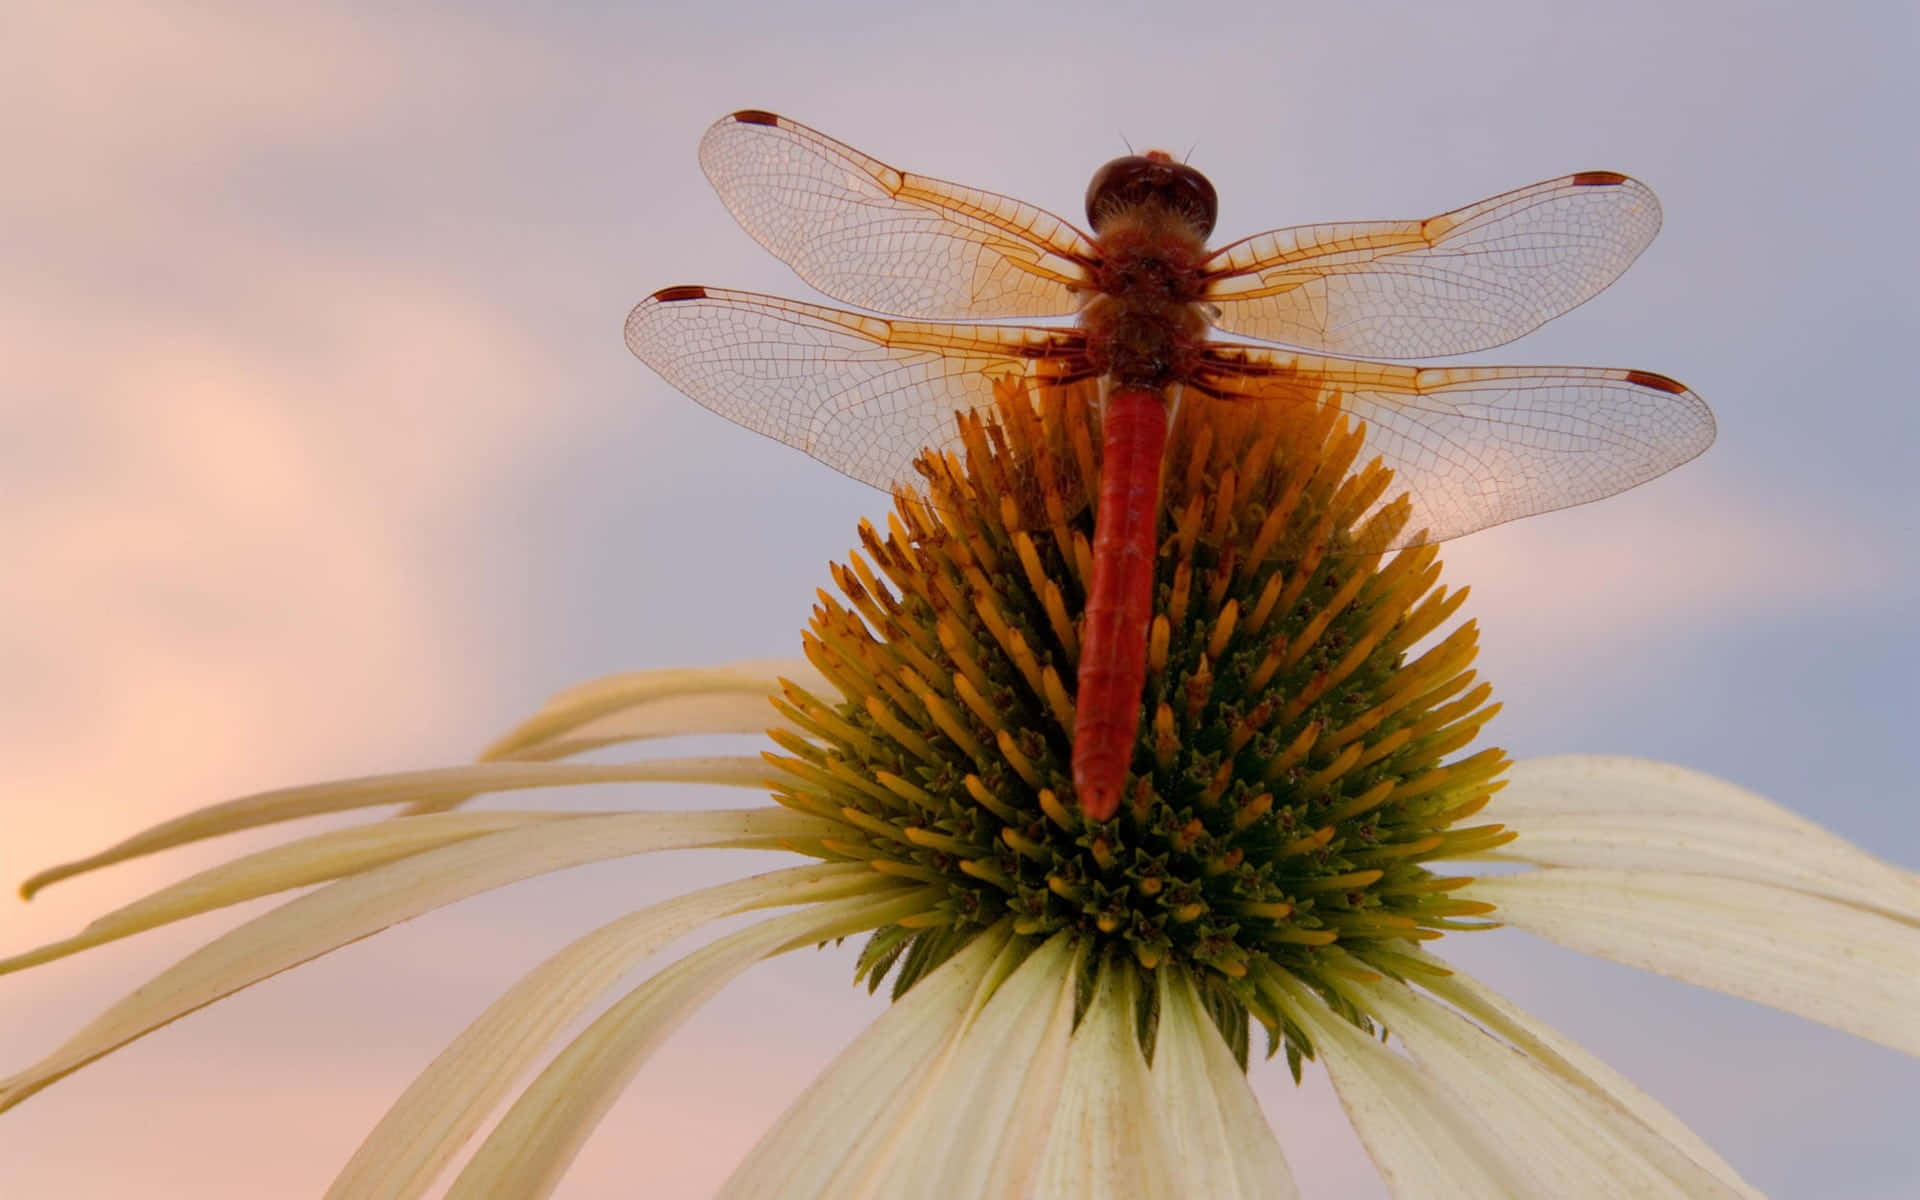 “Admire the beauty of a dragonfly gliding in the summer breeze.”